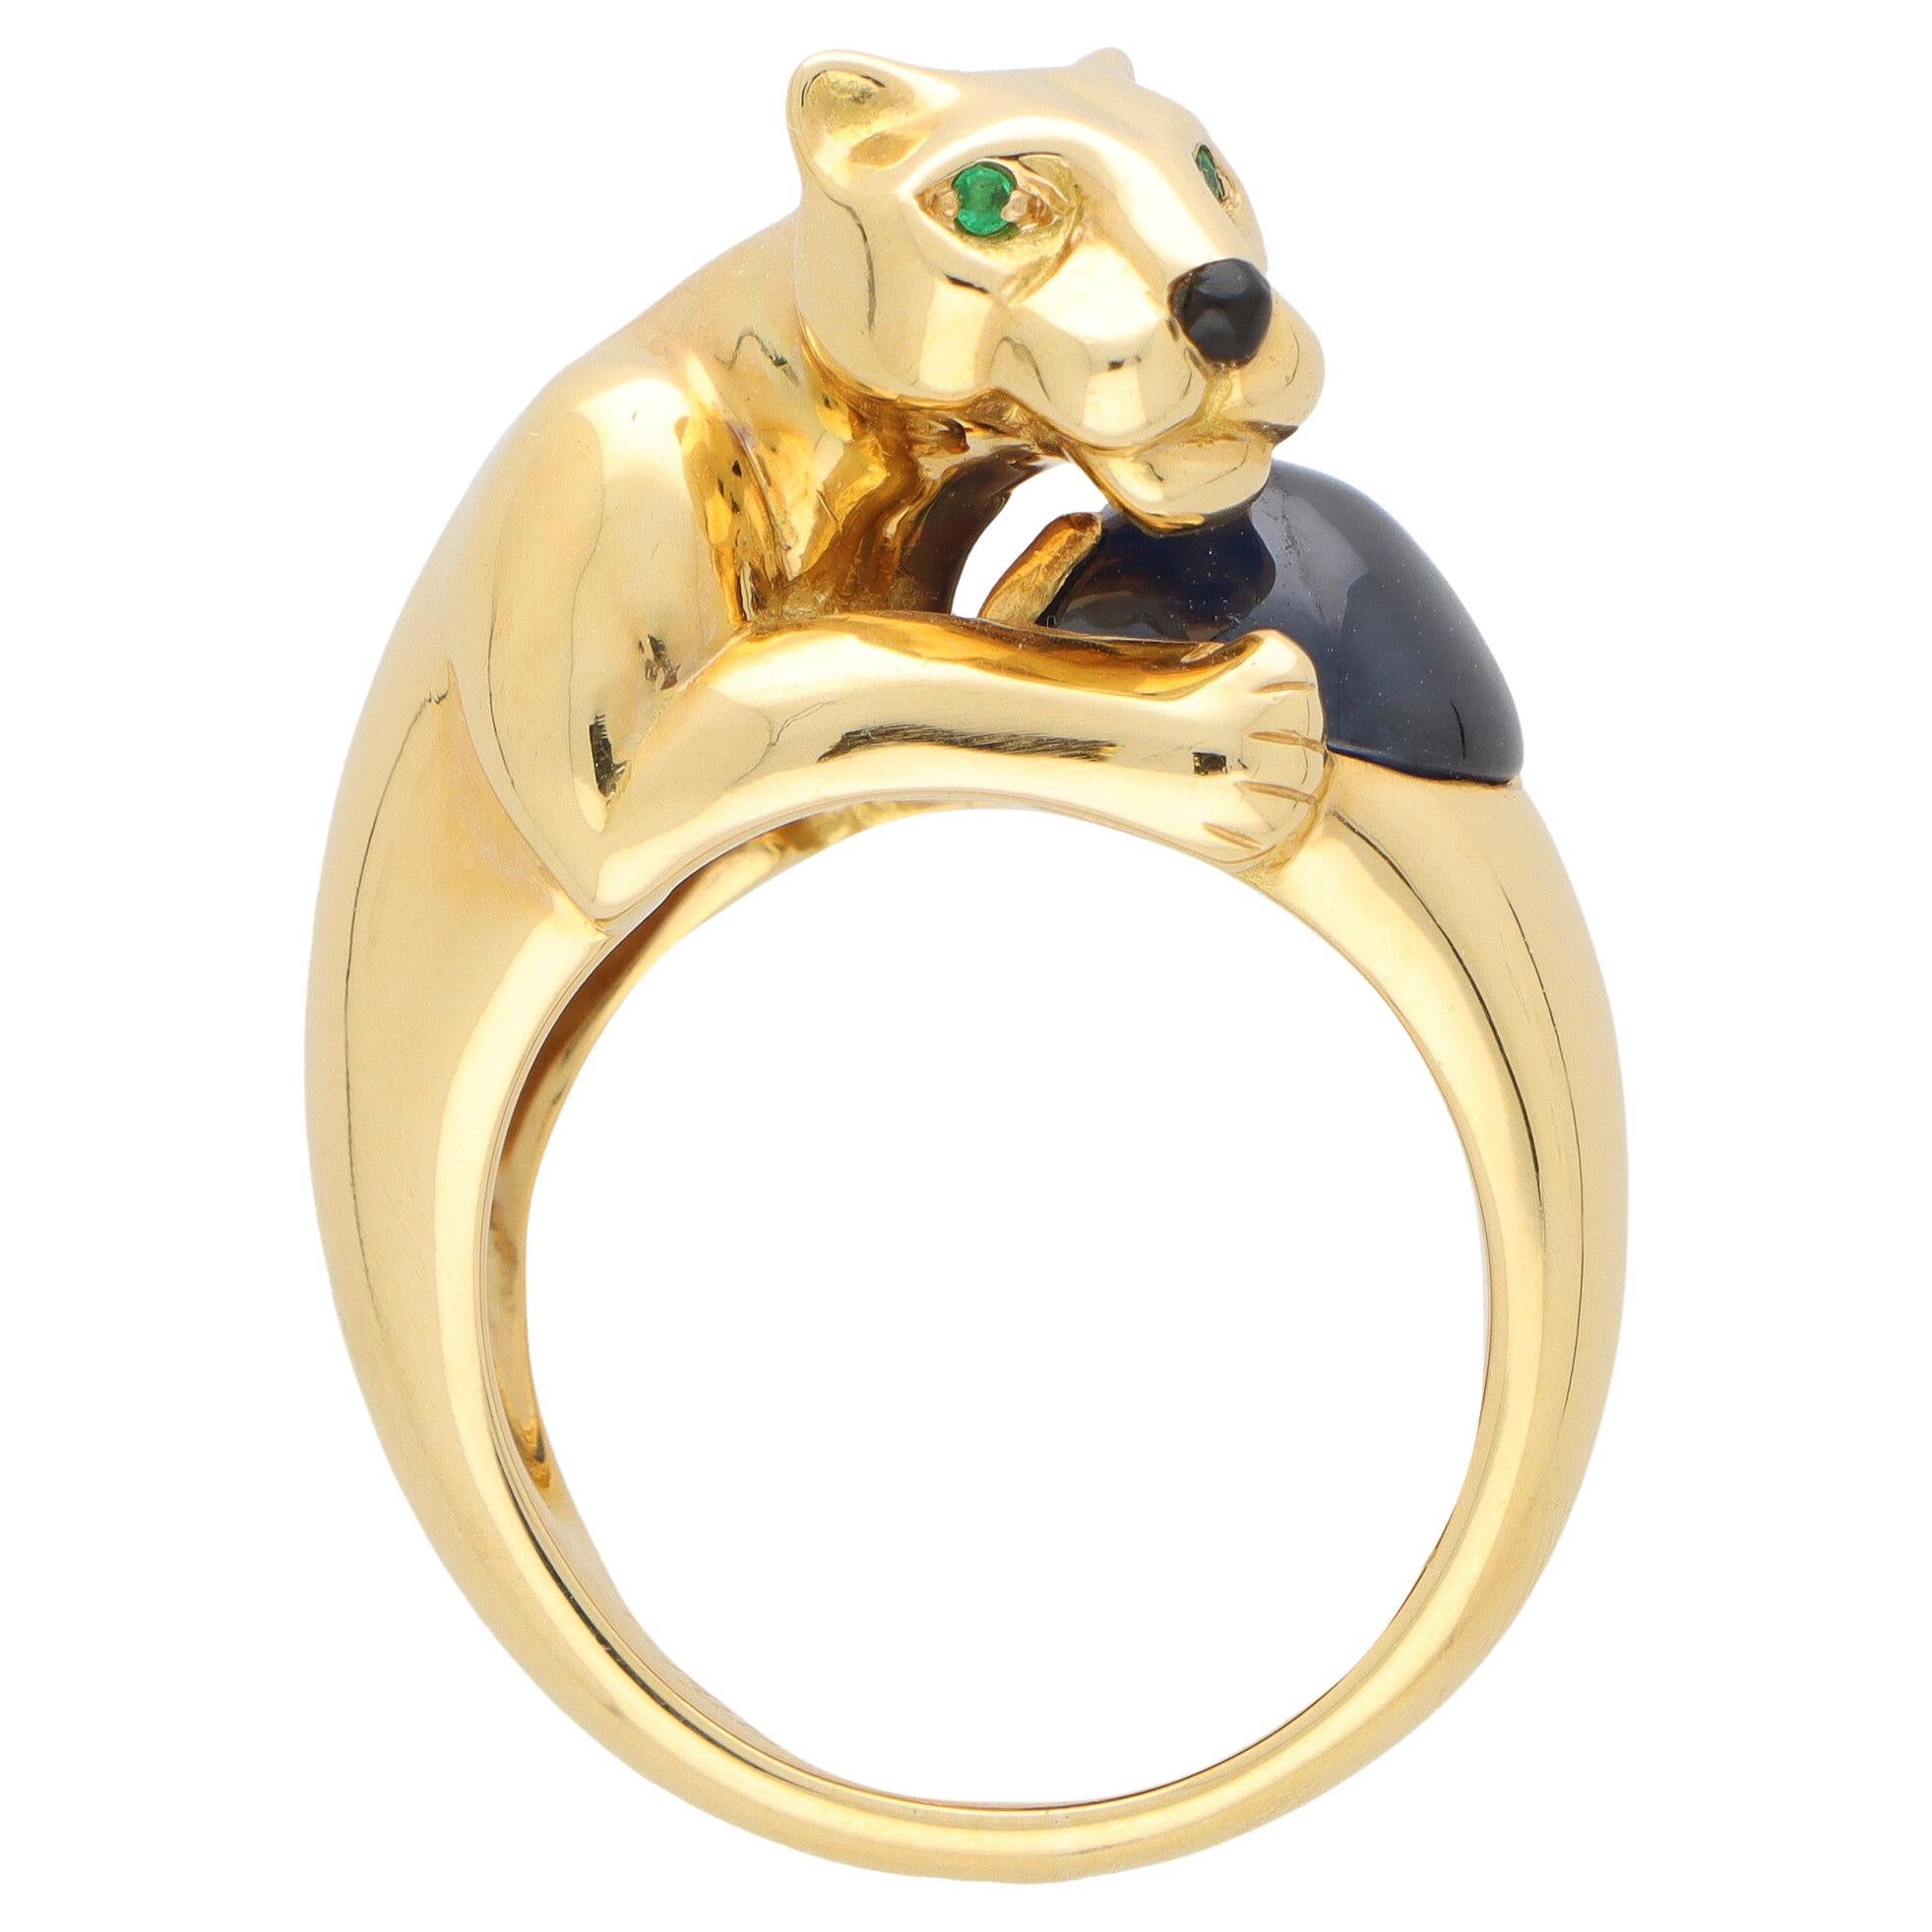 Vintage Panthère De Cartier Sapphire and Emerald Panther Ring Set in 18k Gold